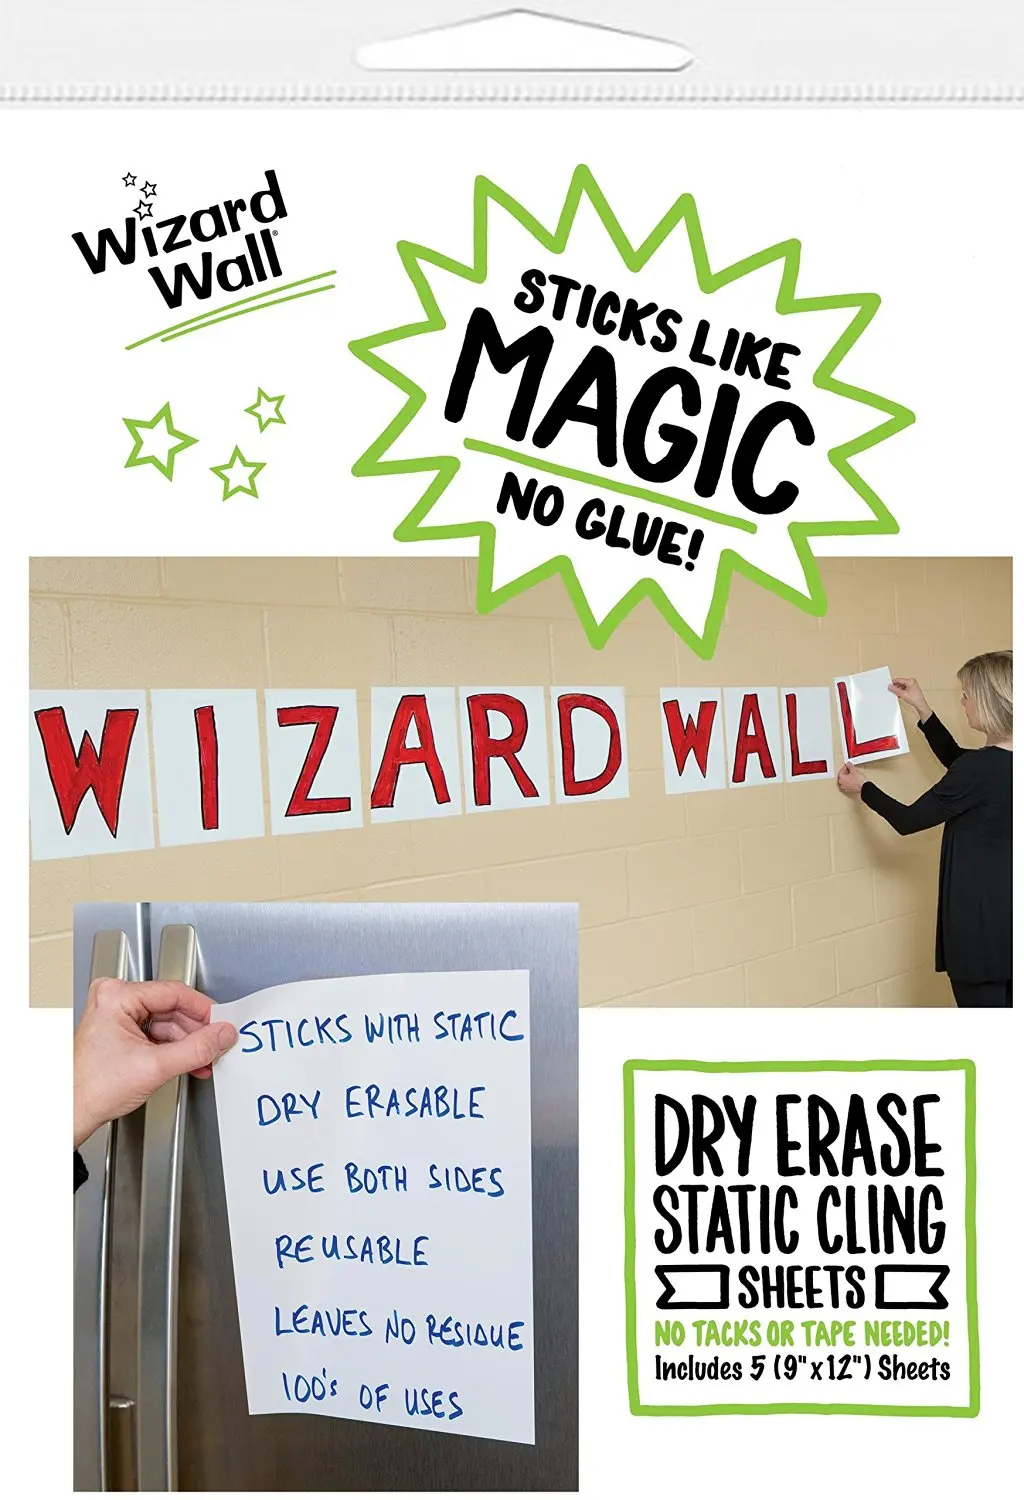 Download Buy Wizard Wall Self Adhesive Dry Erase Sheet, Patented Static Adhesive Technology, Reusable ...